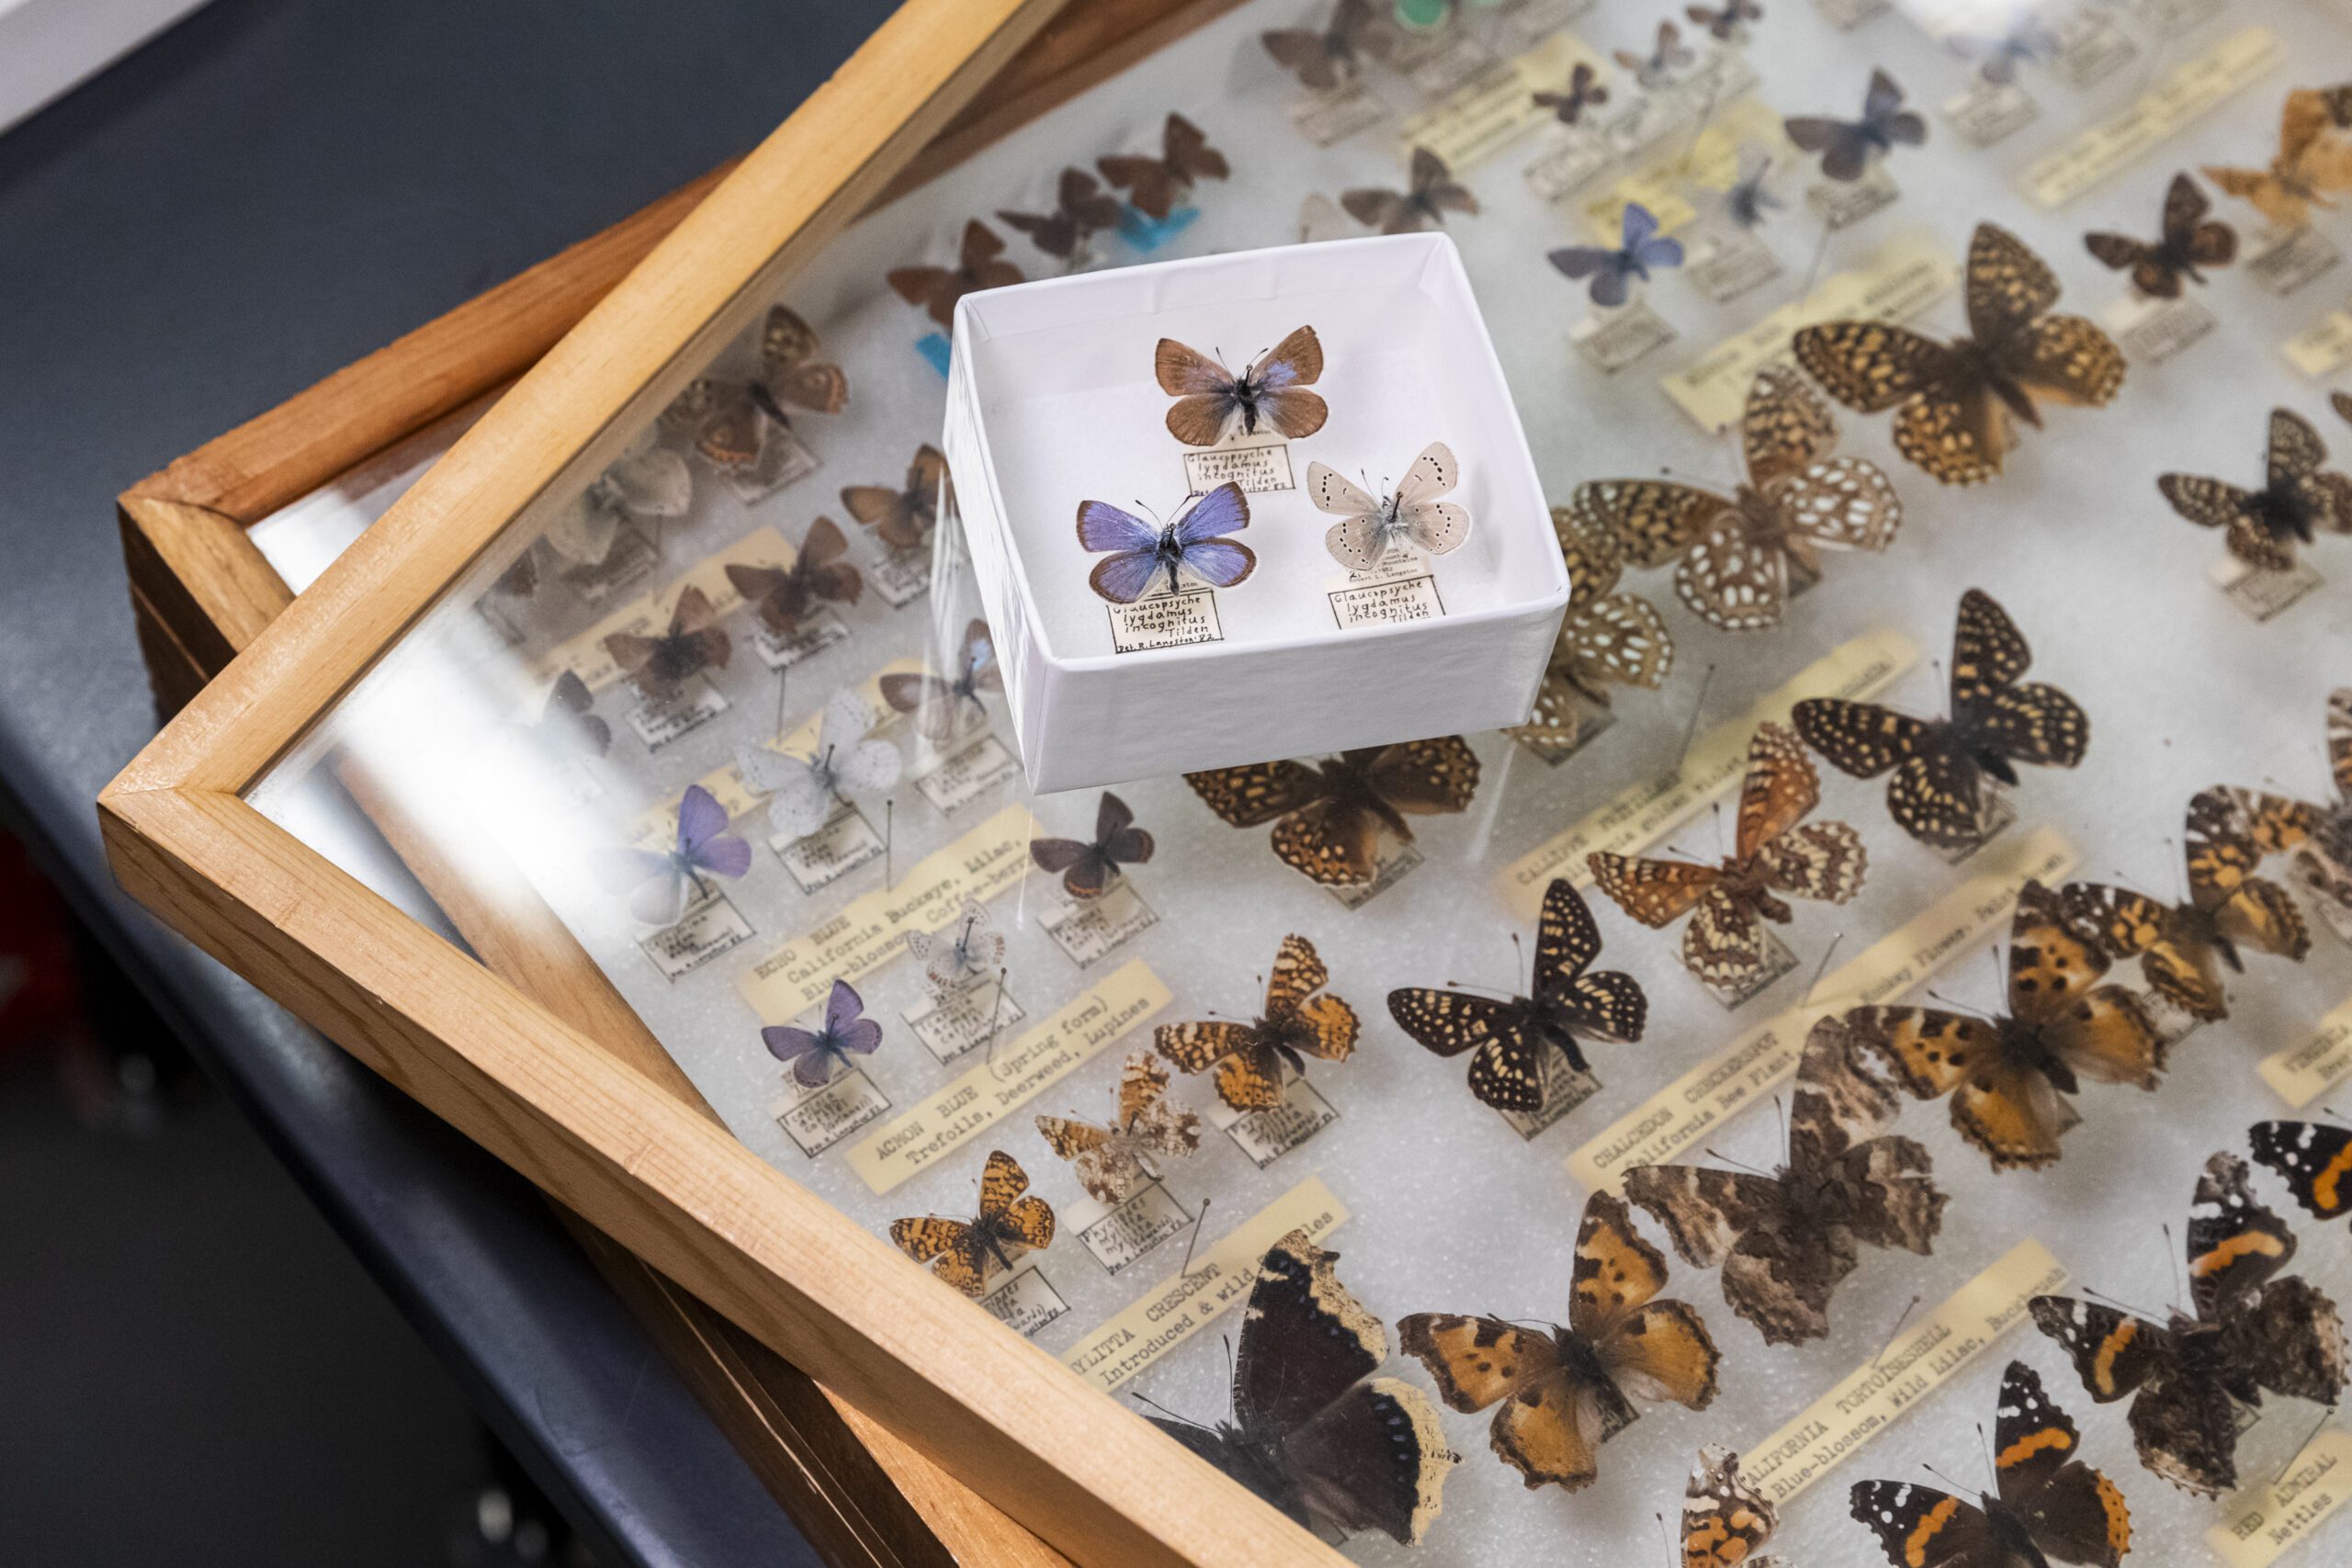 The extinct Xerces Blue butterfly (G. xerces) from the insect collection at the Center Comparative Genomics | California Academy of Sciences